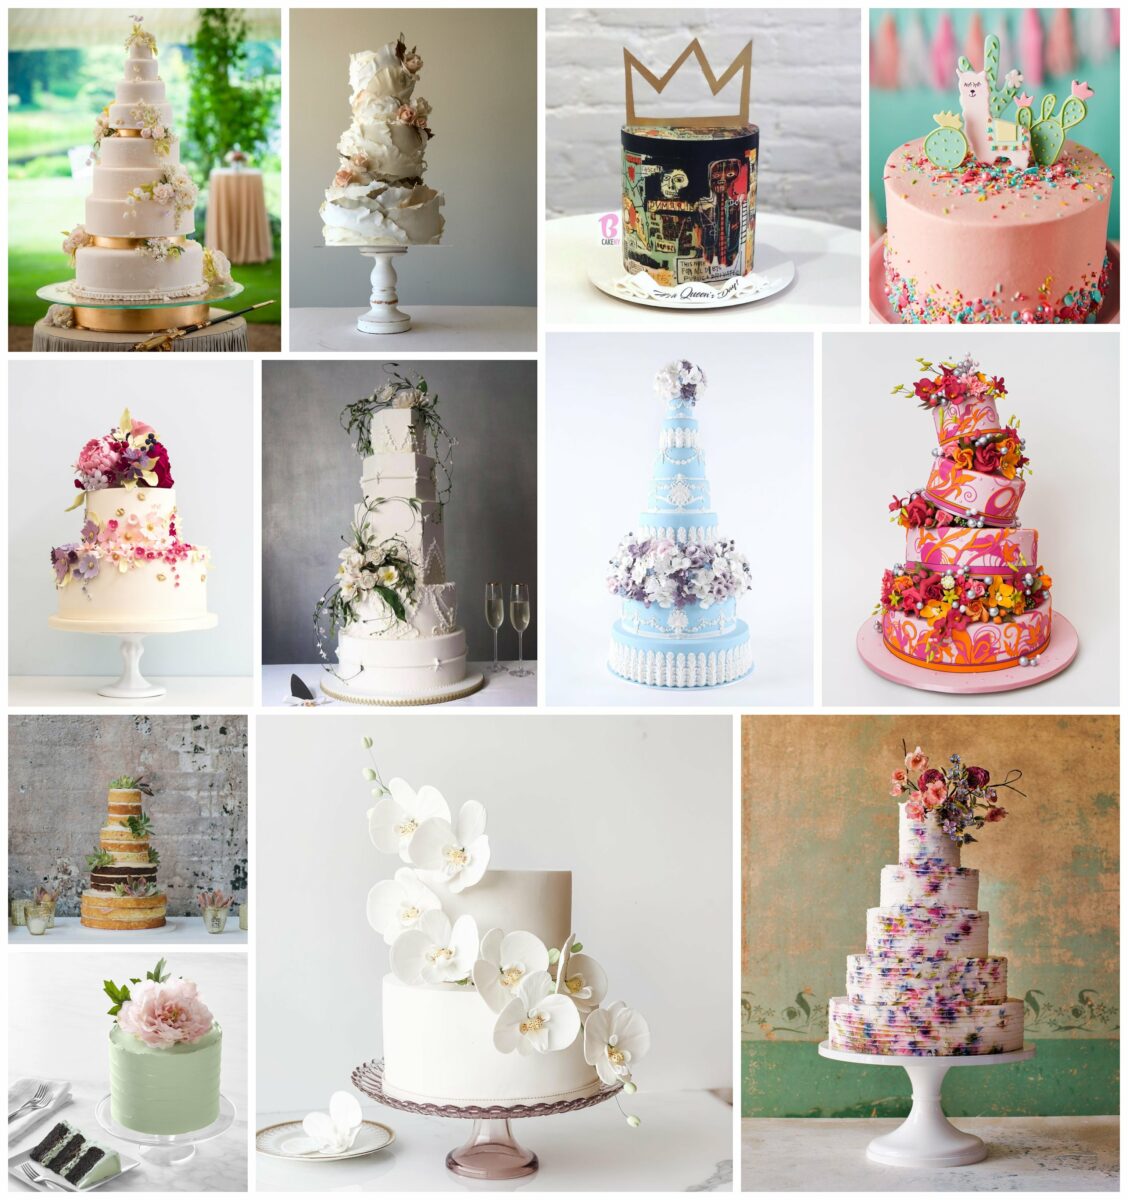 The best luxury cakes, bakers and cake bakeries in the world.